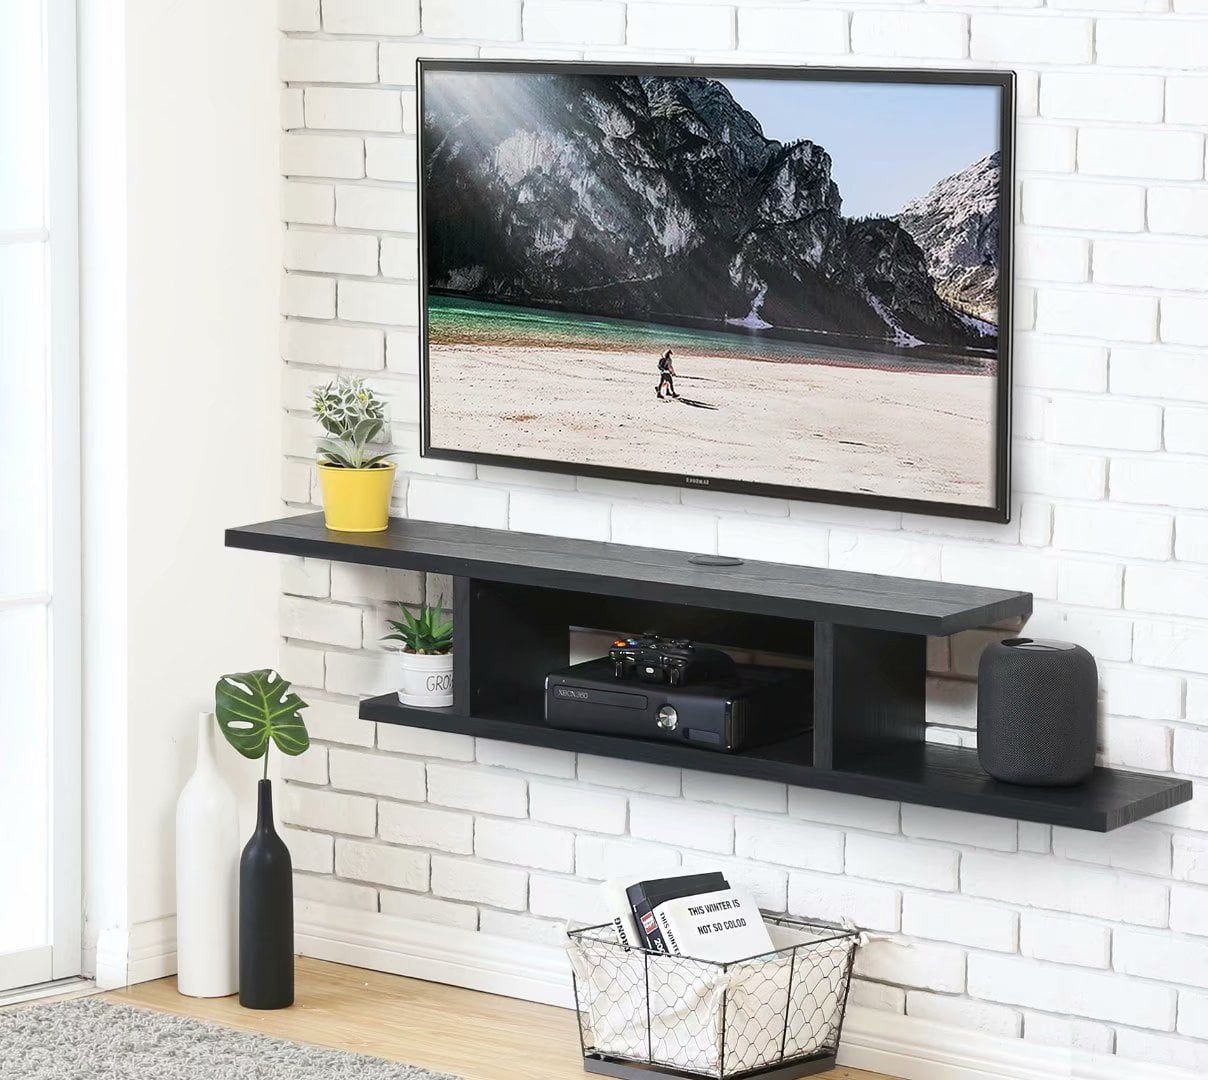 Fitueyes Floating Tv Shelf Wall Mounted Media Console Entertainment Intended For Top Shelf Mount Tv Stands (View 4 of 20)